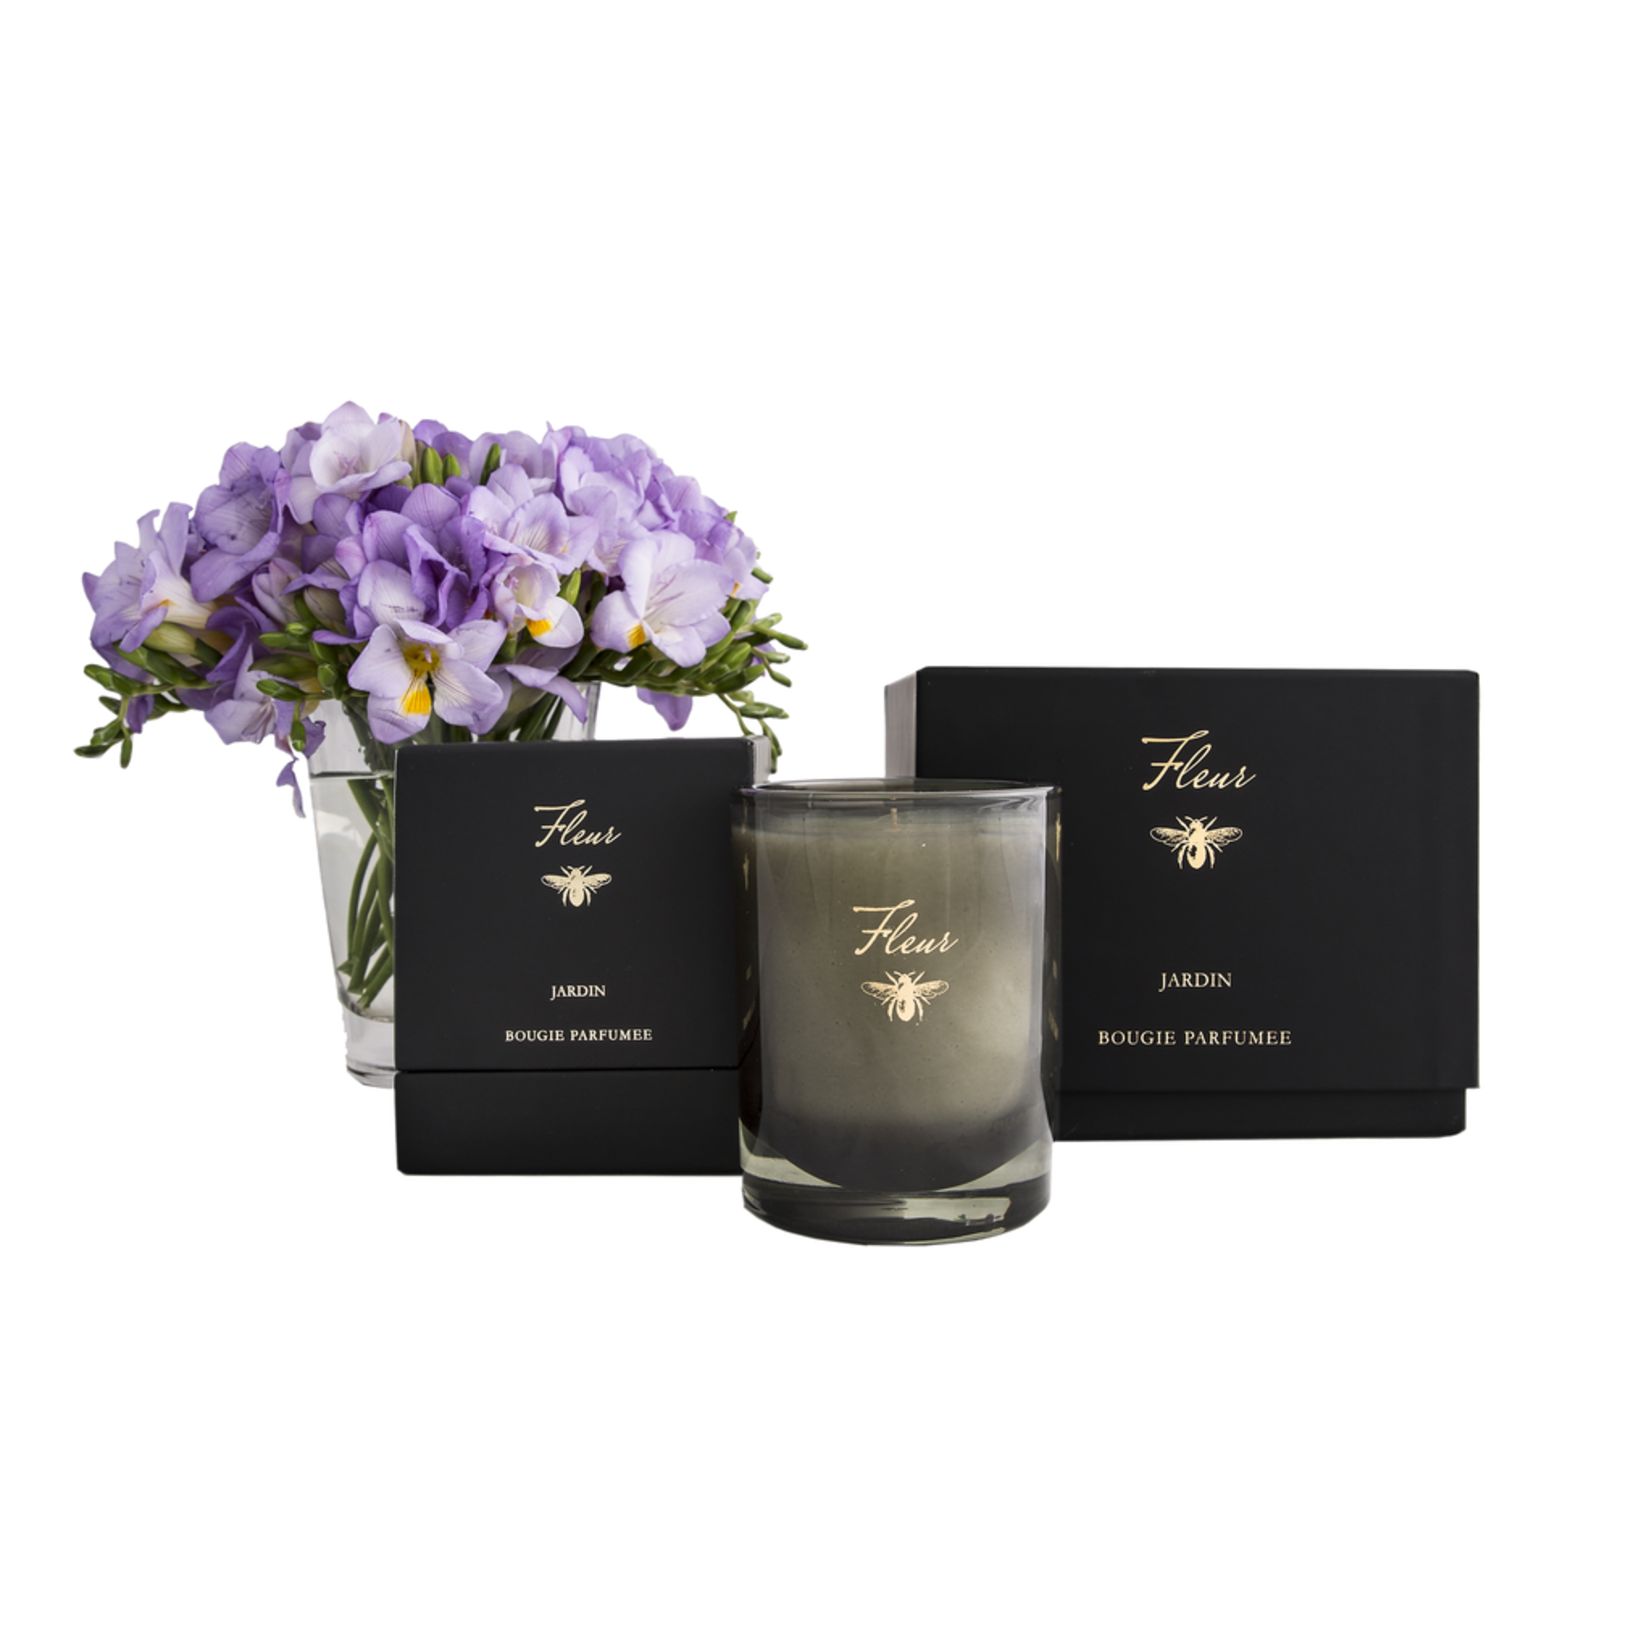 Fleur Candles Fleur Candles, Single-Wick Soy Candle, 55 hour burn time